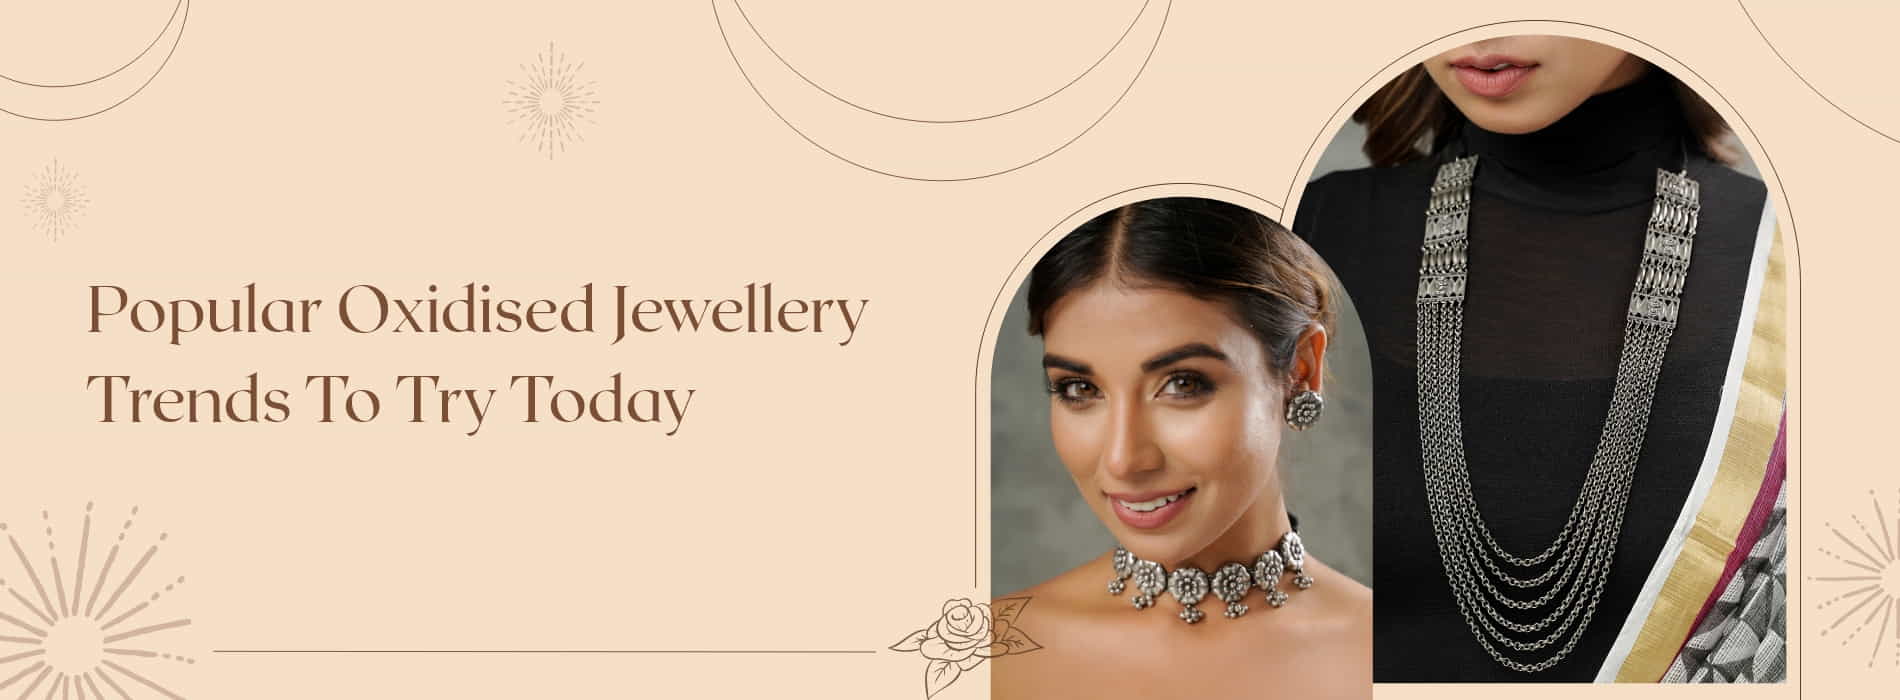 Popular-Oxidised-Jewellery-Trends-To-Try-Today-Viraasi